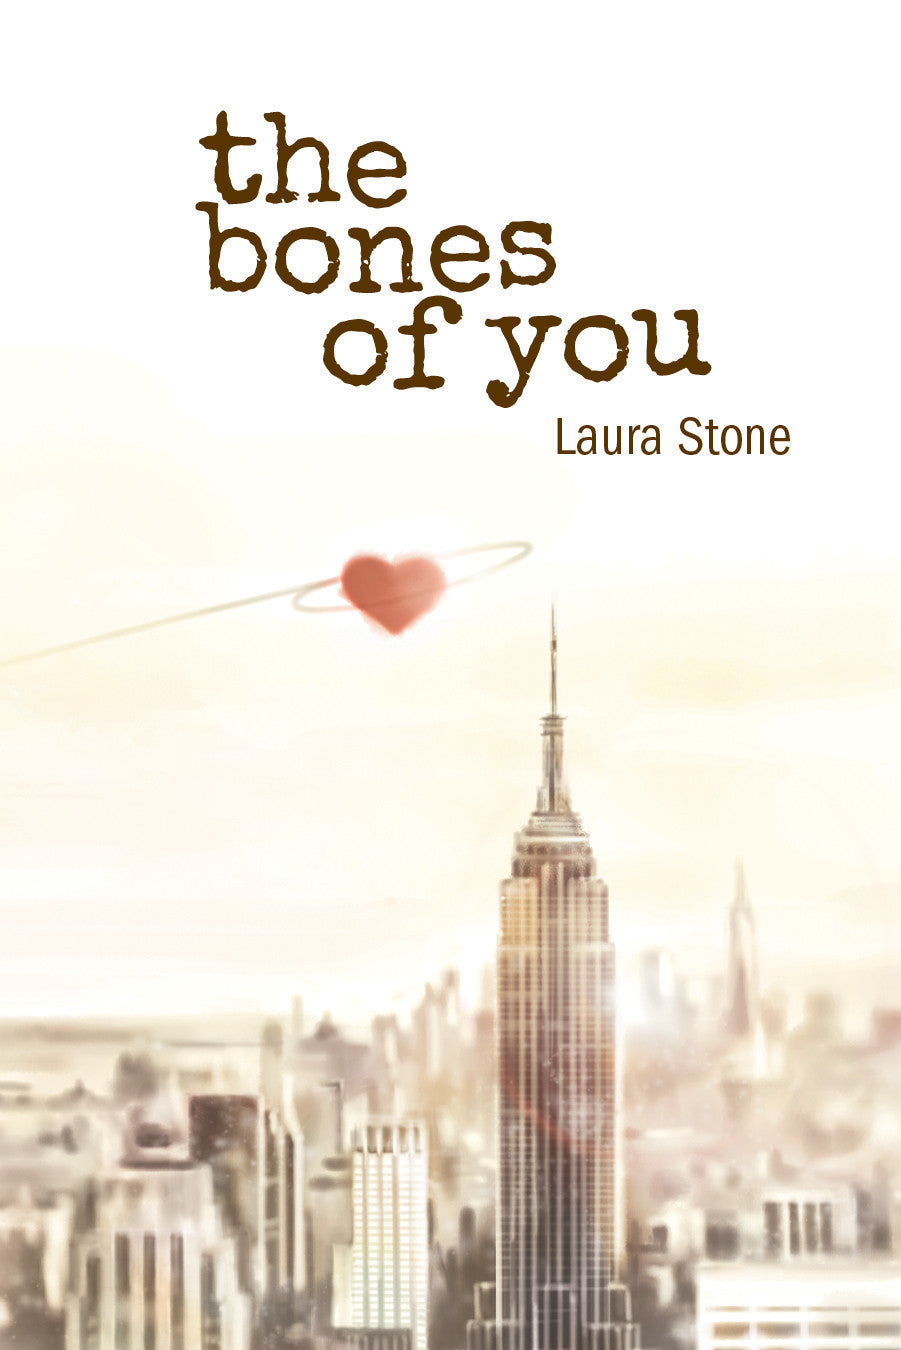 The Bones of You by Laura Stone